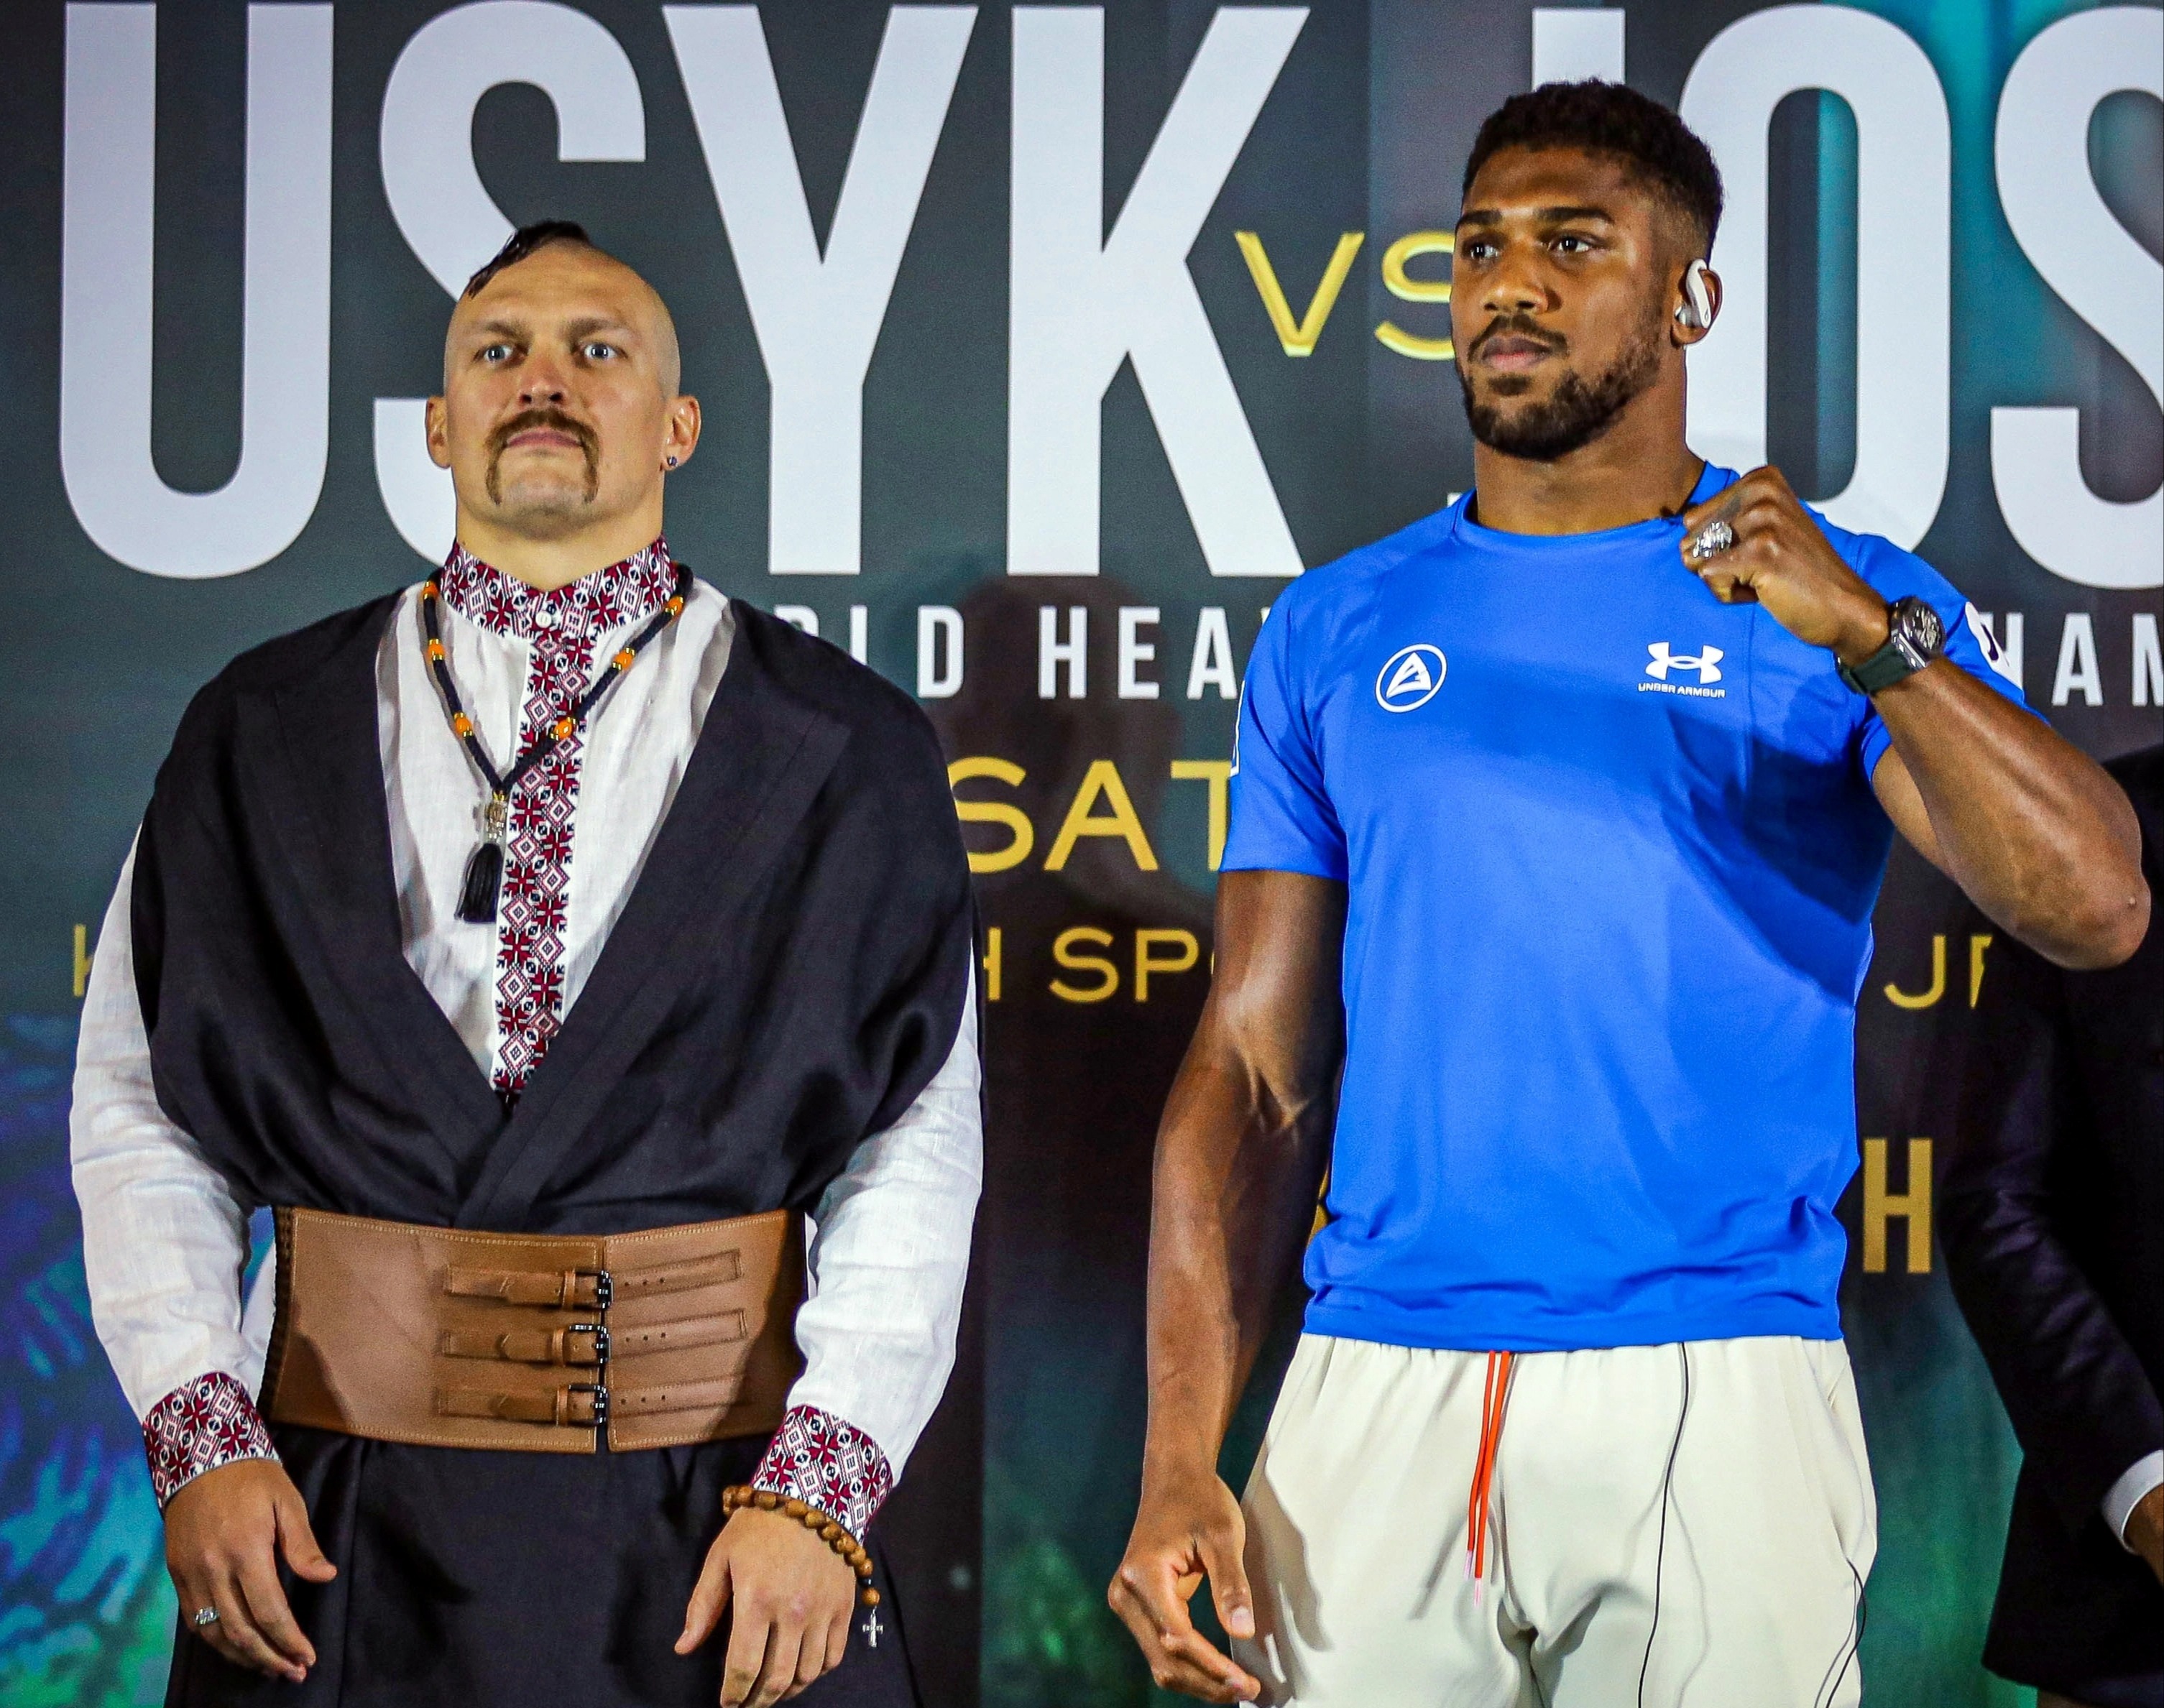 , Anthony Joshua insists he WON’T retire if he losses to Oleksandr Usyk in rematch as he’s fighting P4P best